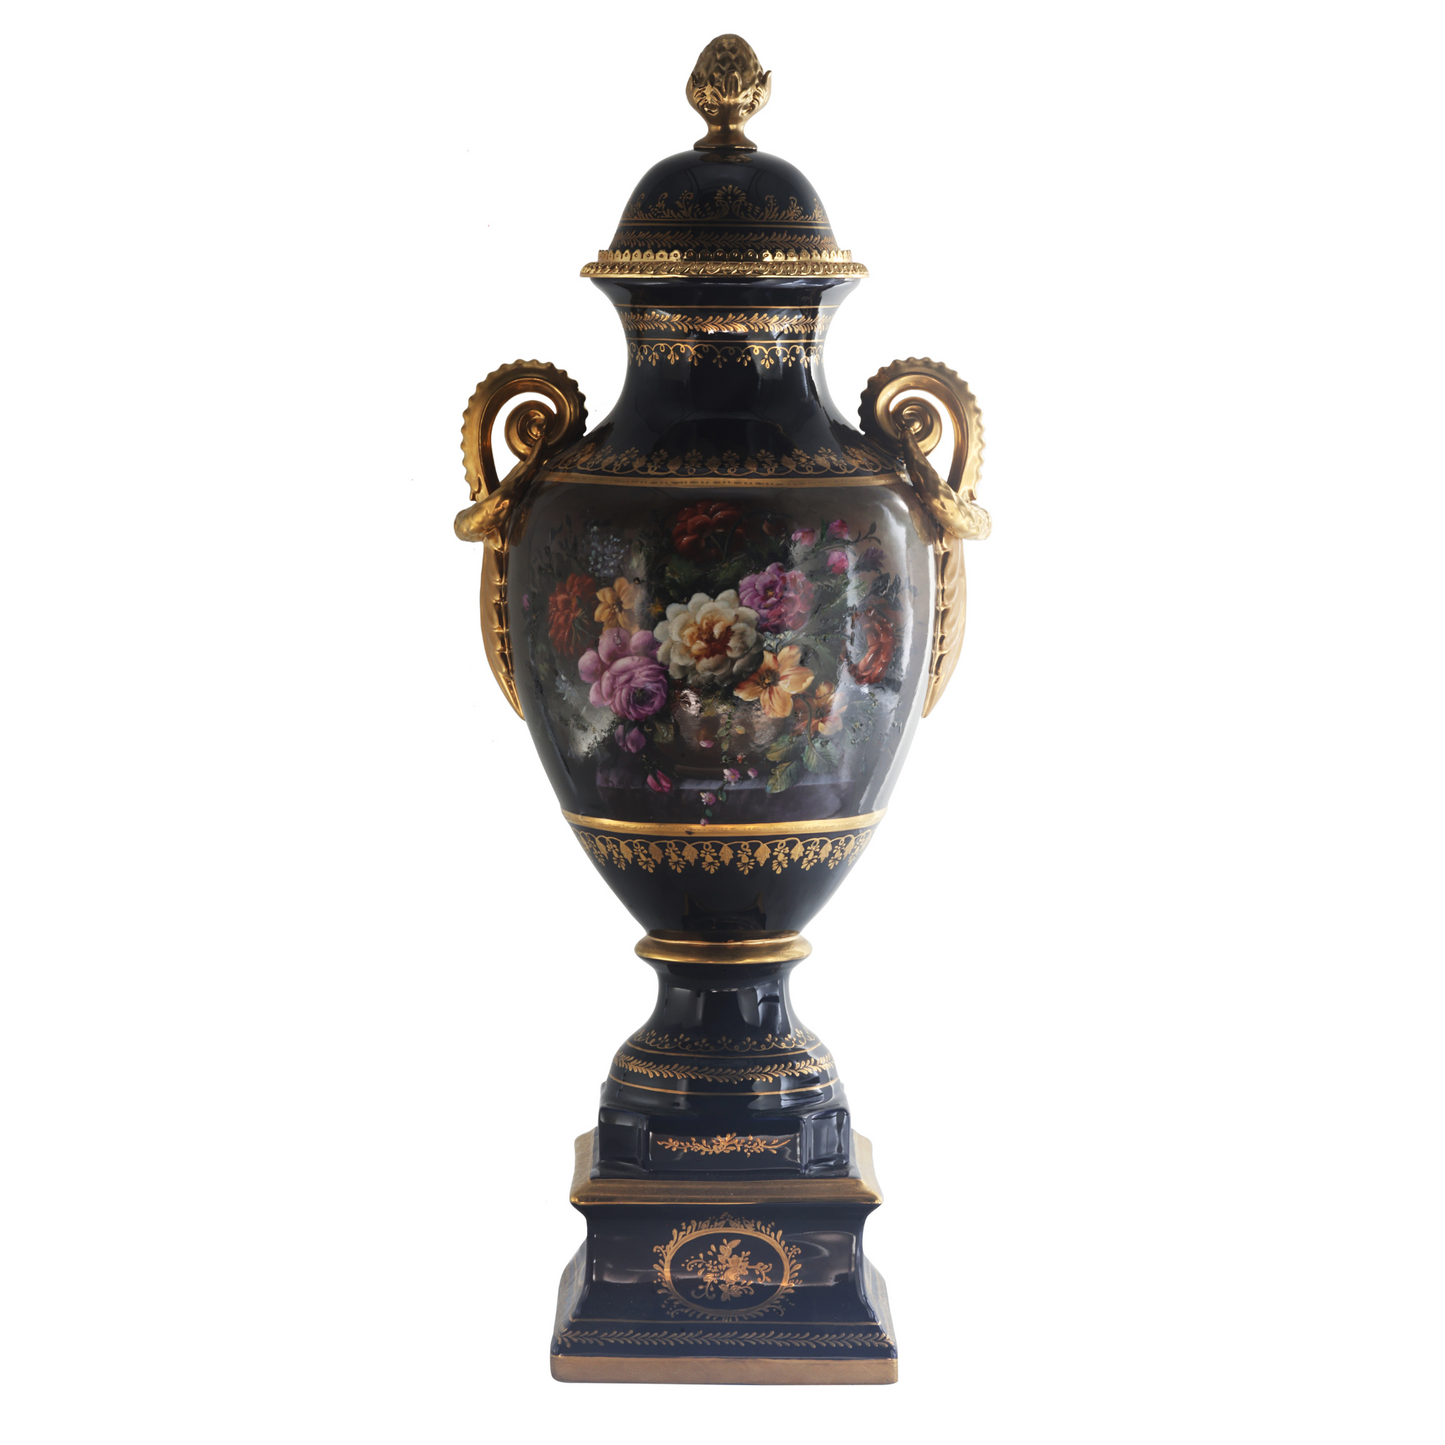 Hand-painted Porcelain Urn with Floral Motif